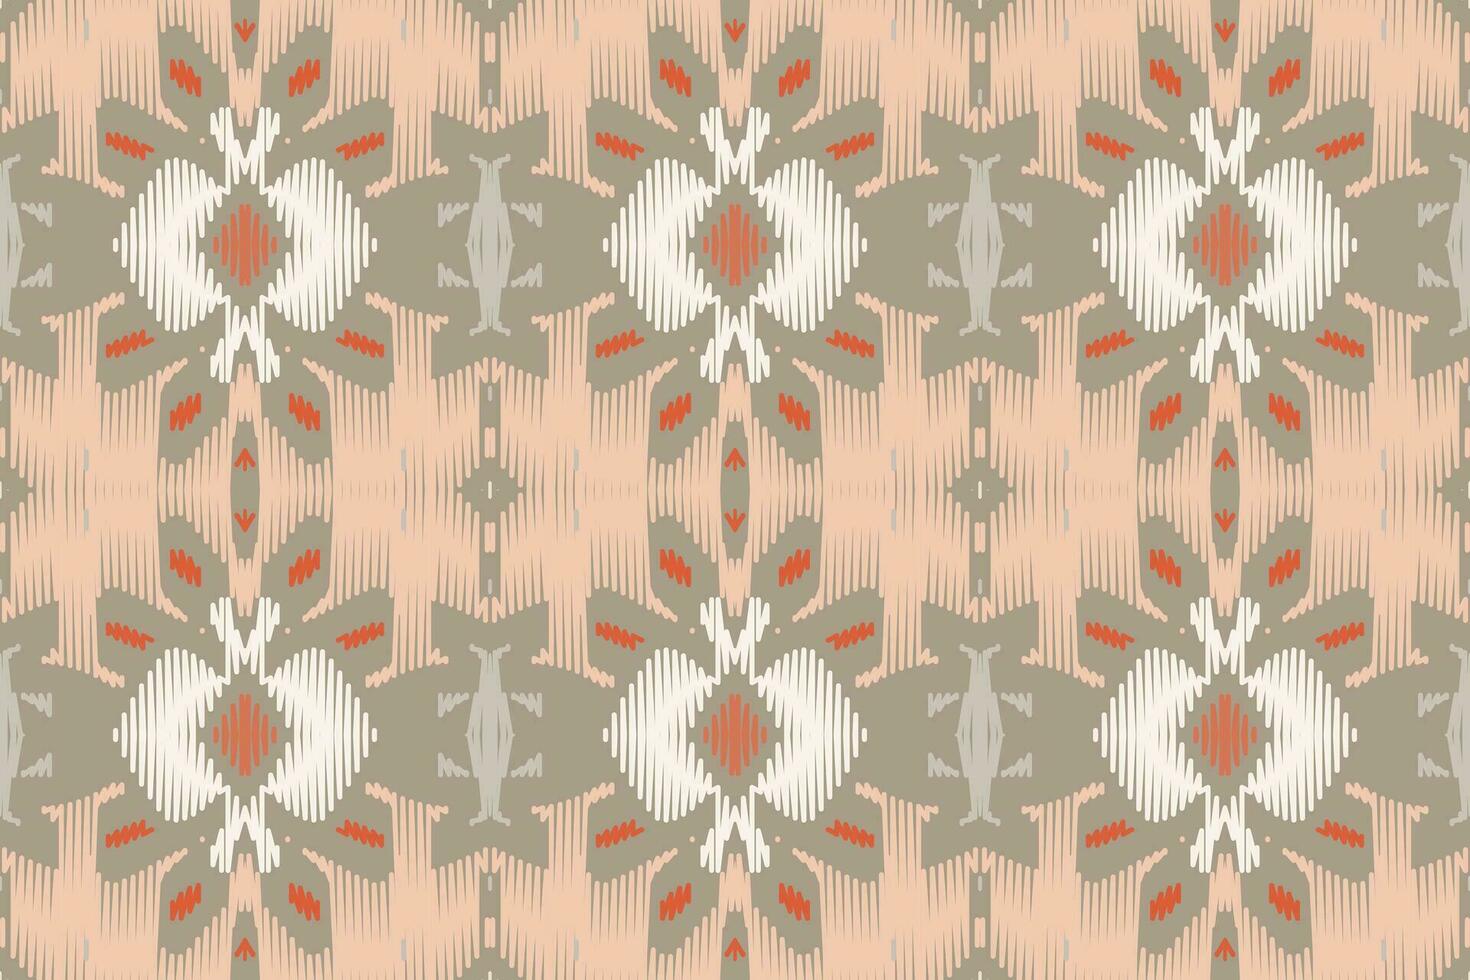 Ikat Damask Embroidery Background. Ikat Damask Geometric Ethnic Oriental Pattern traditional.aztec Style Abstract Vector illustration.design for Texture,fabric,clothing,wrapping,sarong.